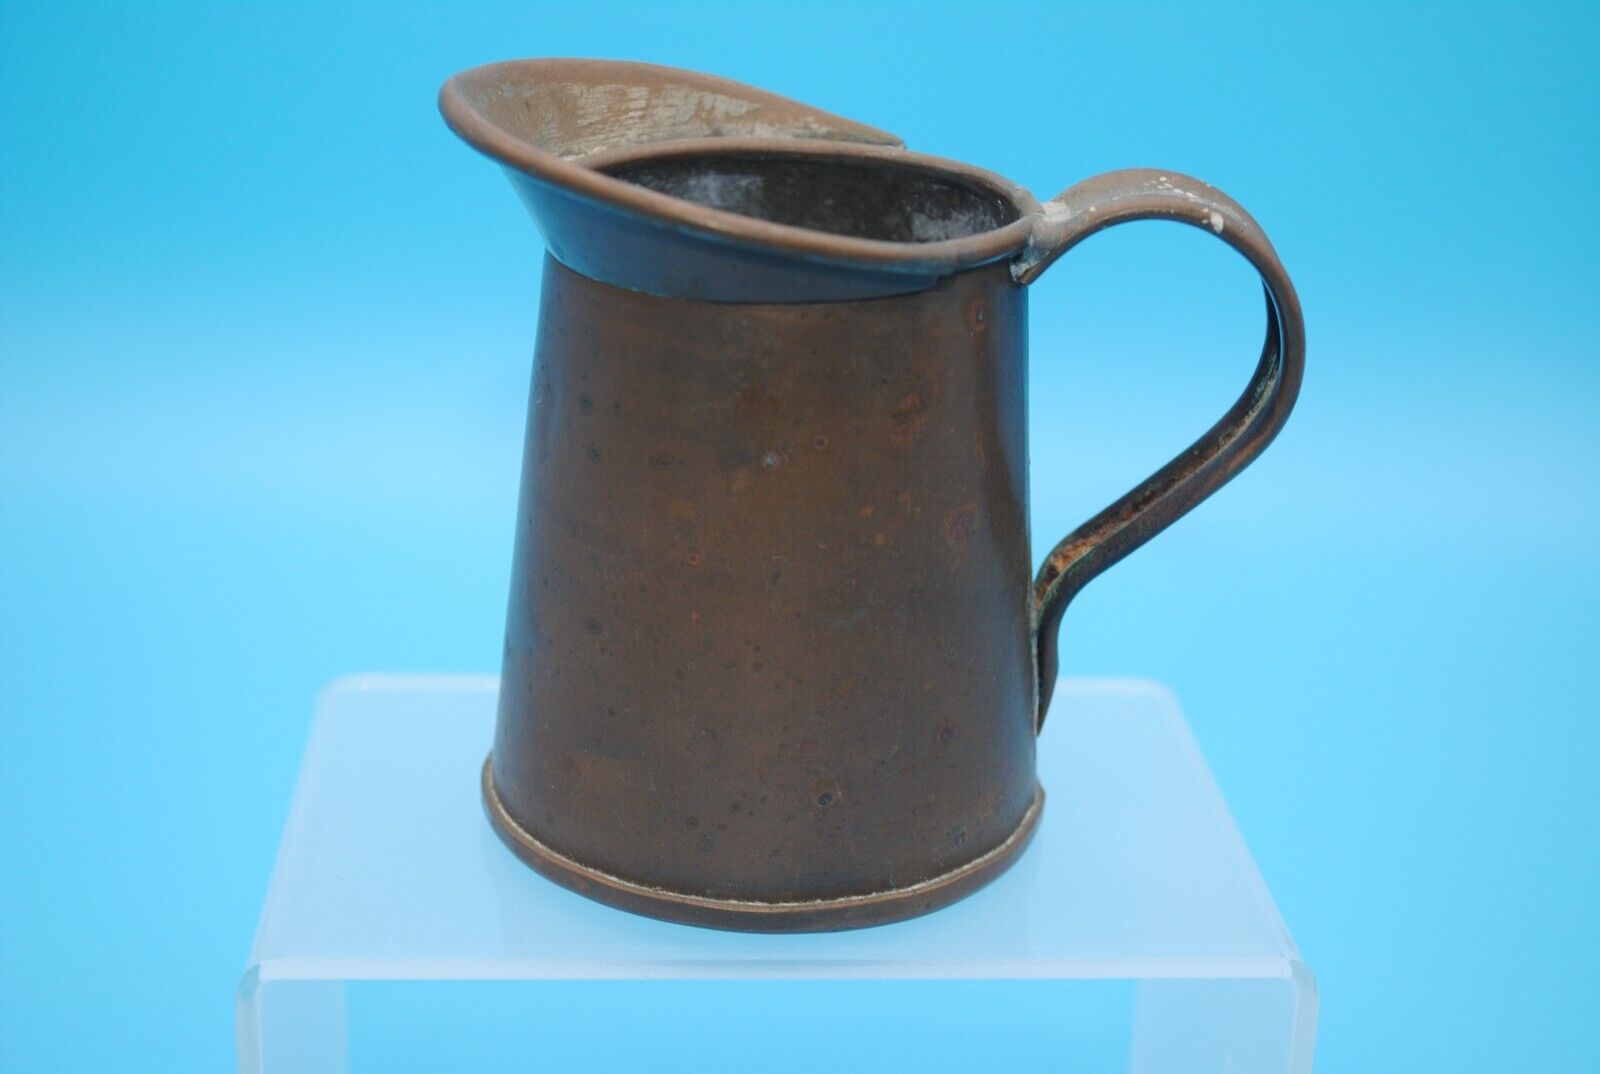 Antique solid copper pitcher. Handmade and may be a measuring cup.